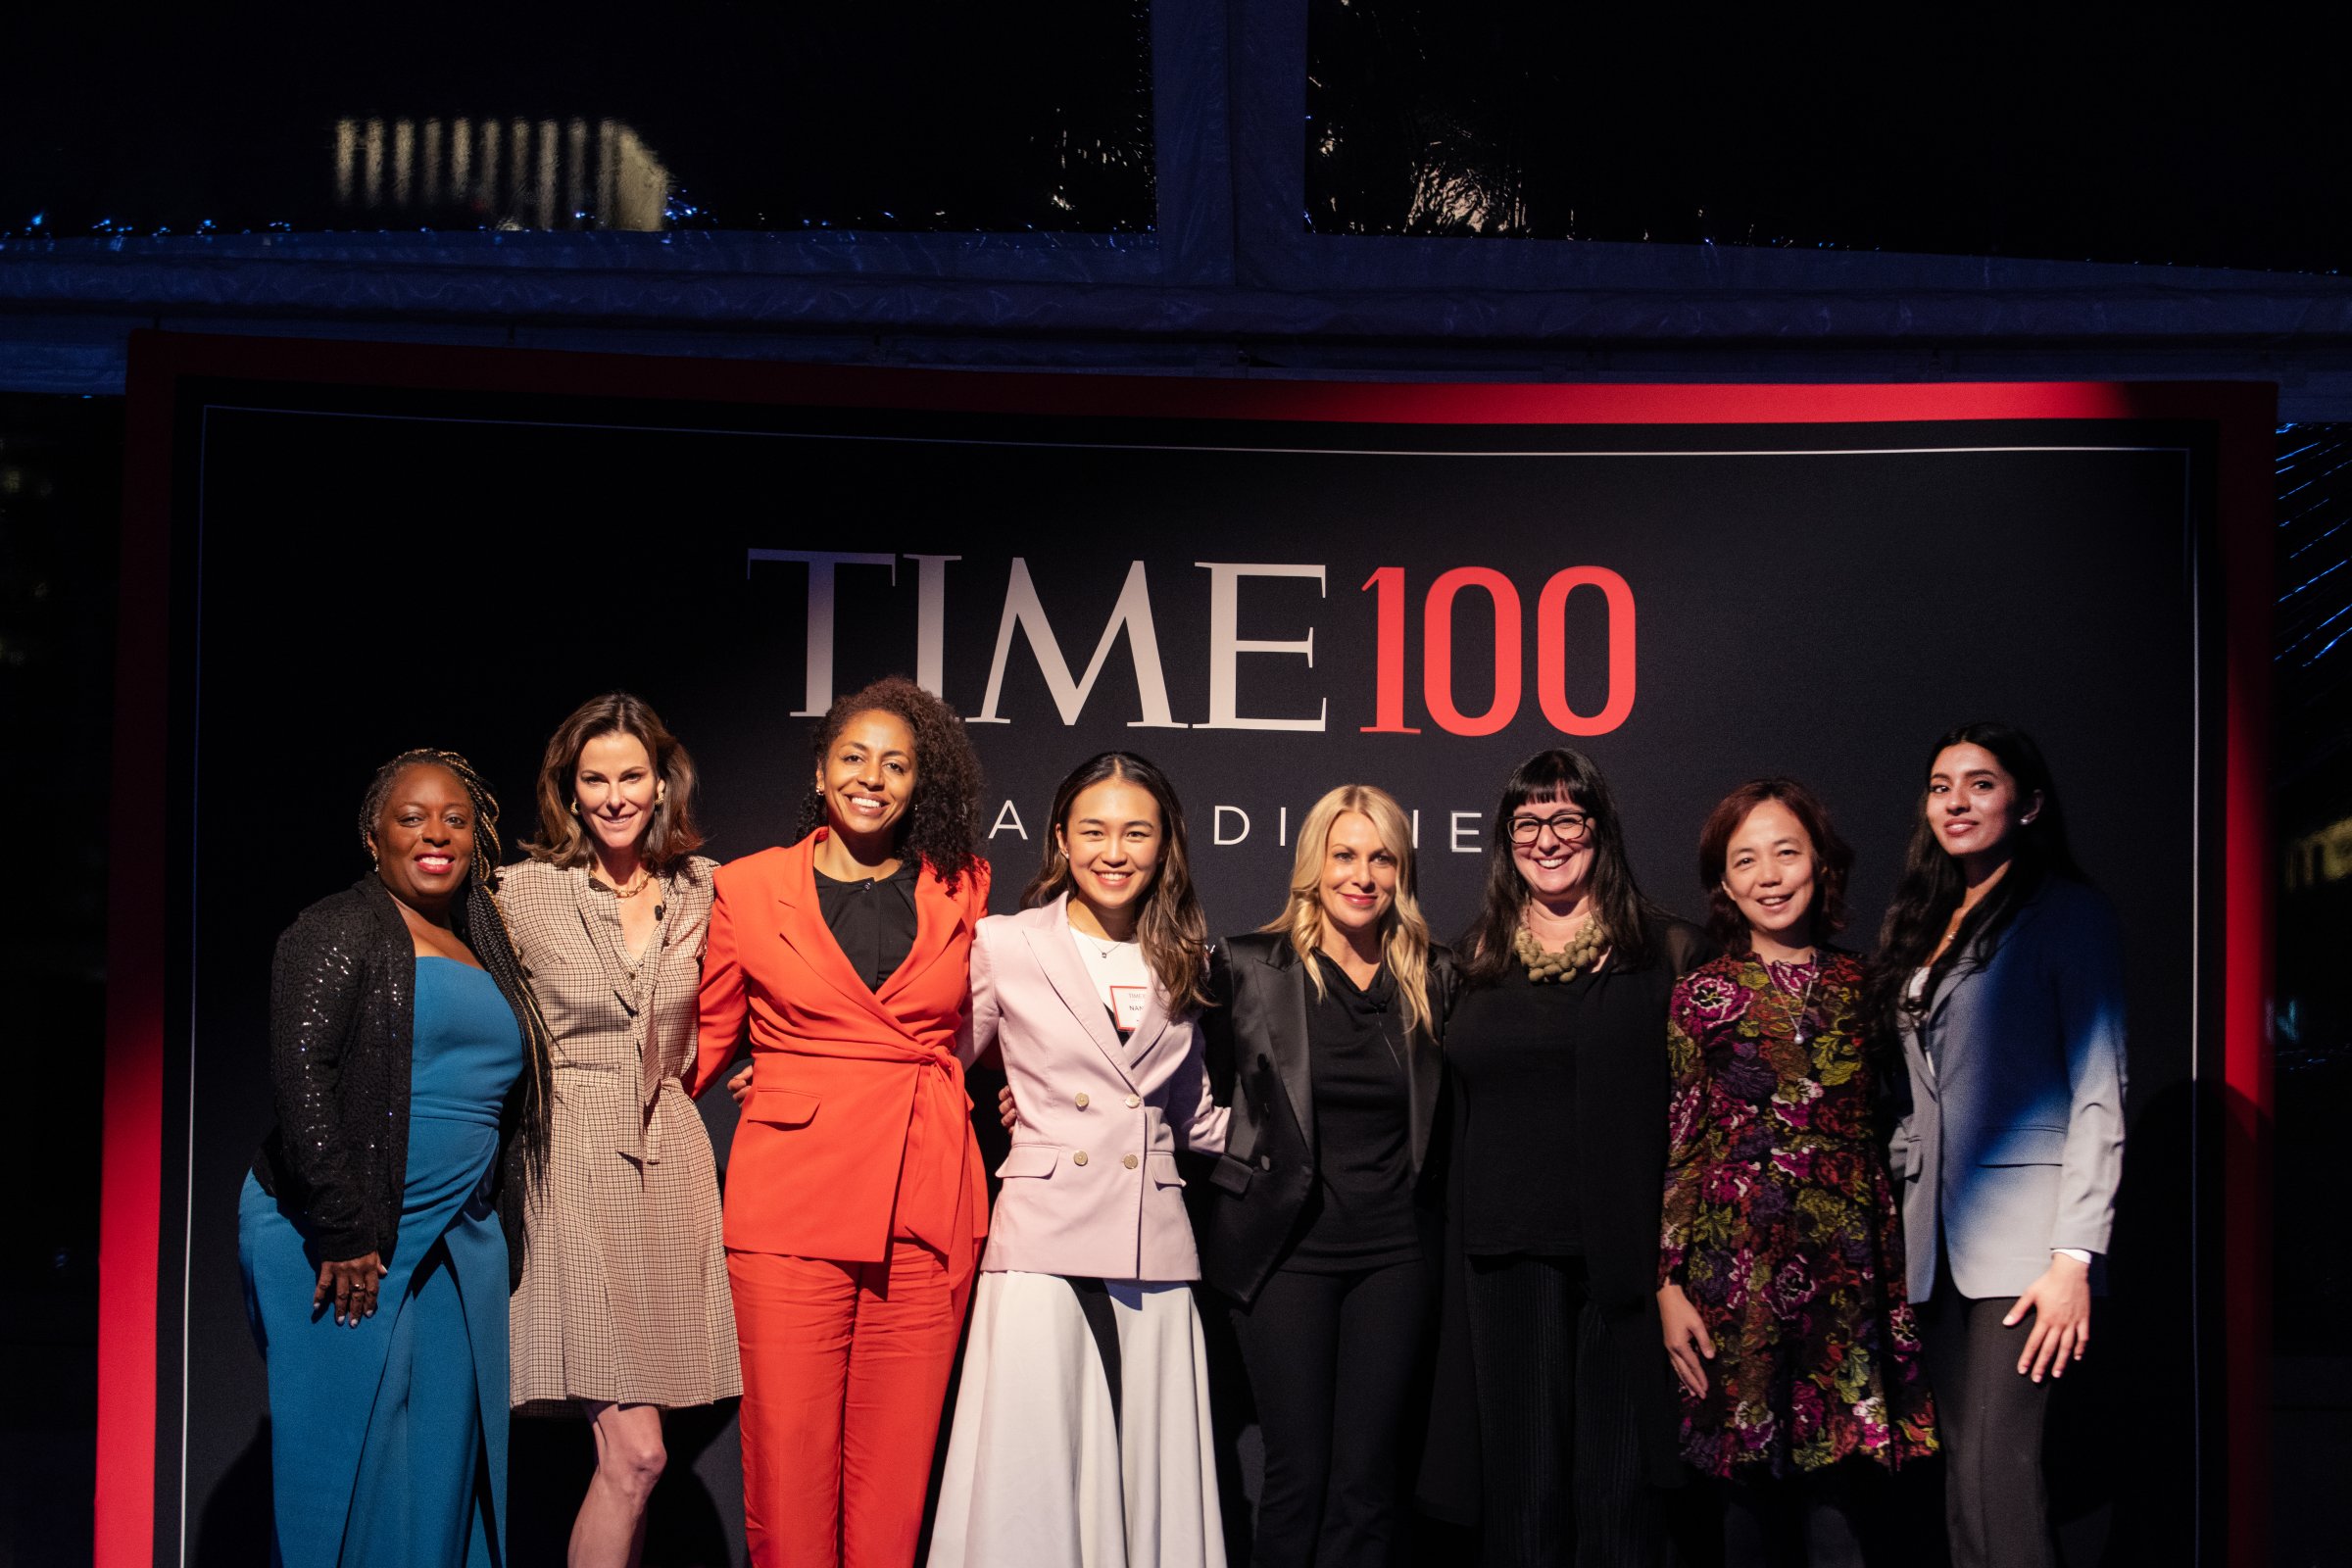 Hosts and guests at TIME’s Impact Dinner: Extraordinary Women Shaping the Future of AI. Left to right: Kimberly Bryant, Campbell Brown, Anna Makanju, Nancy Xu, Jess Sibley, Sarah Conley Odenkirk, Fei-Fei Li, Sneha Revanur.